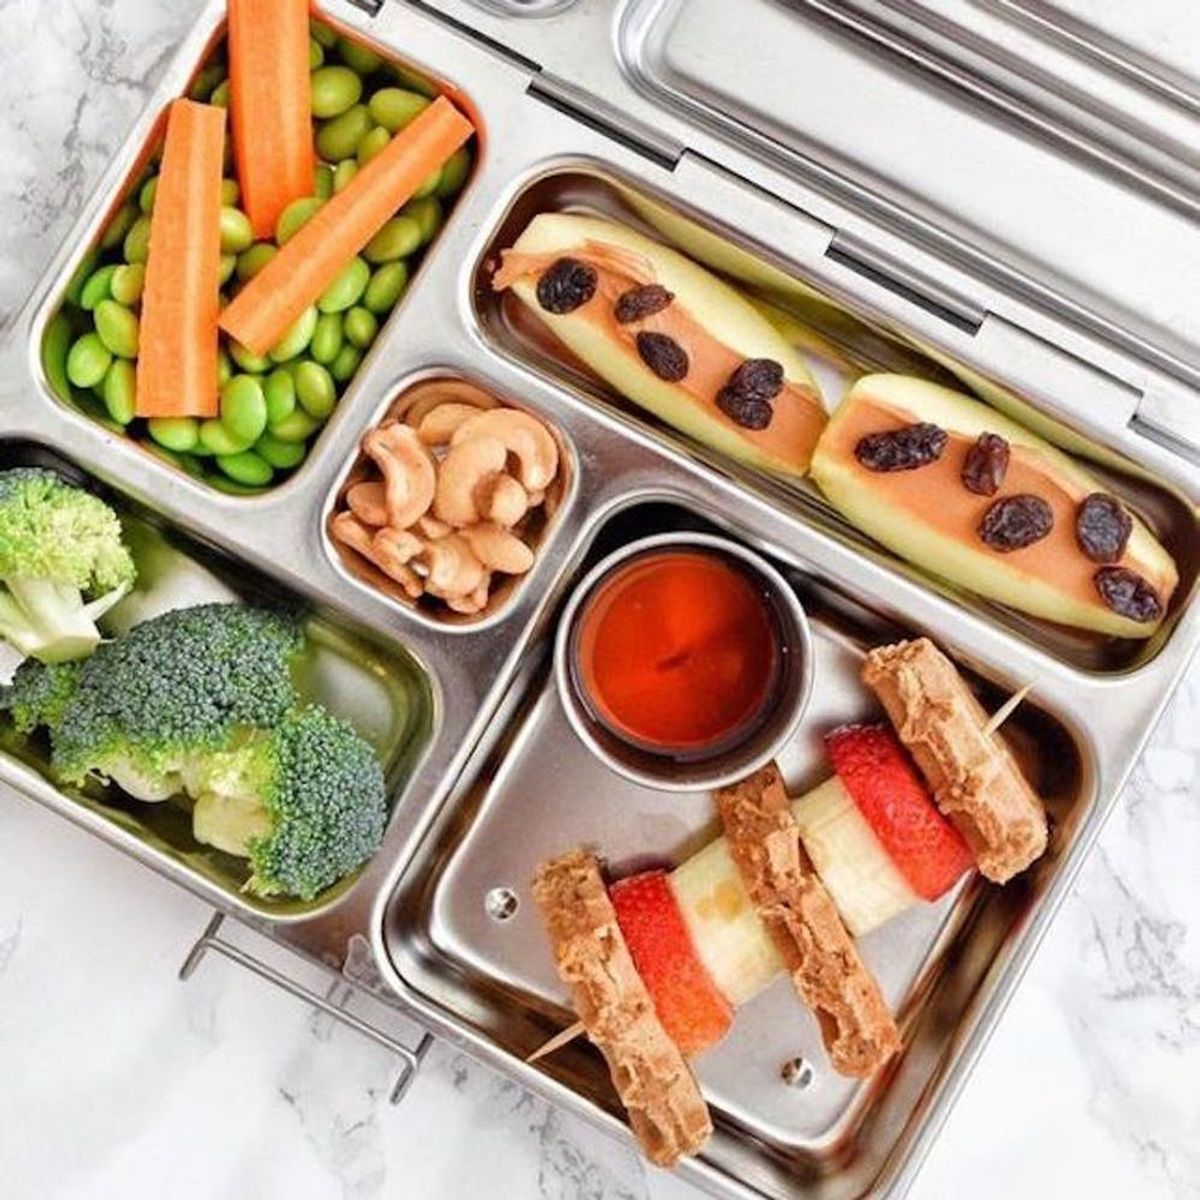 These 12 Insta-Moms Will Give You Major Inspo for Your Kids’ Lunchbox